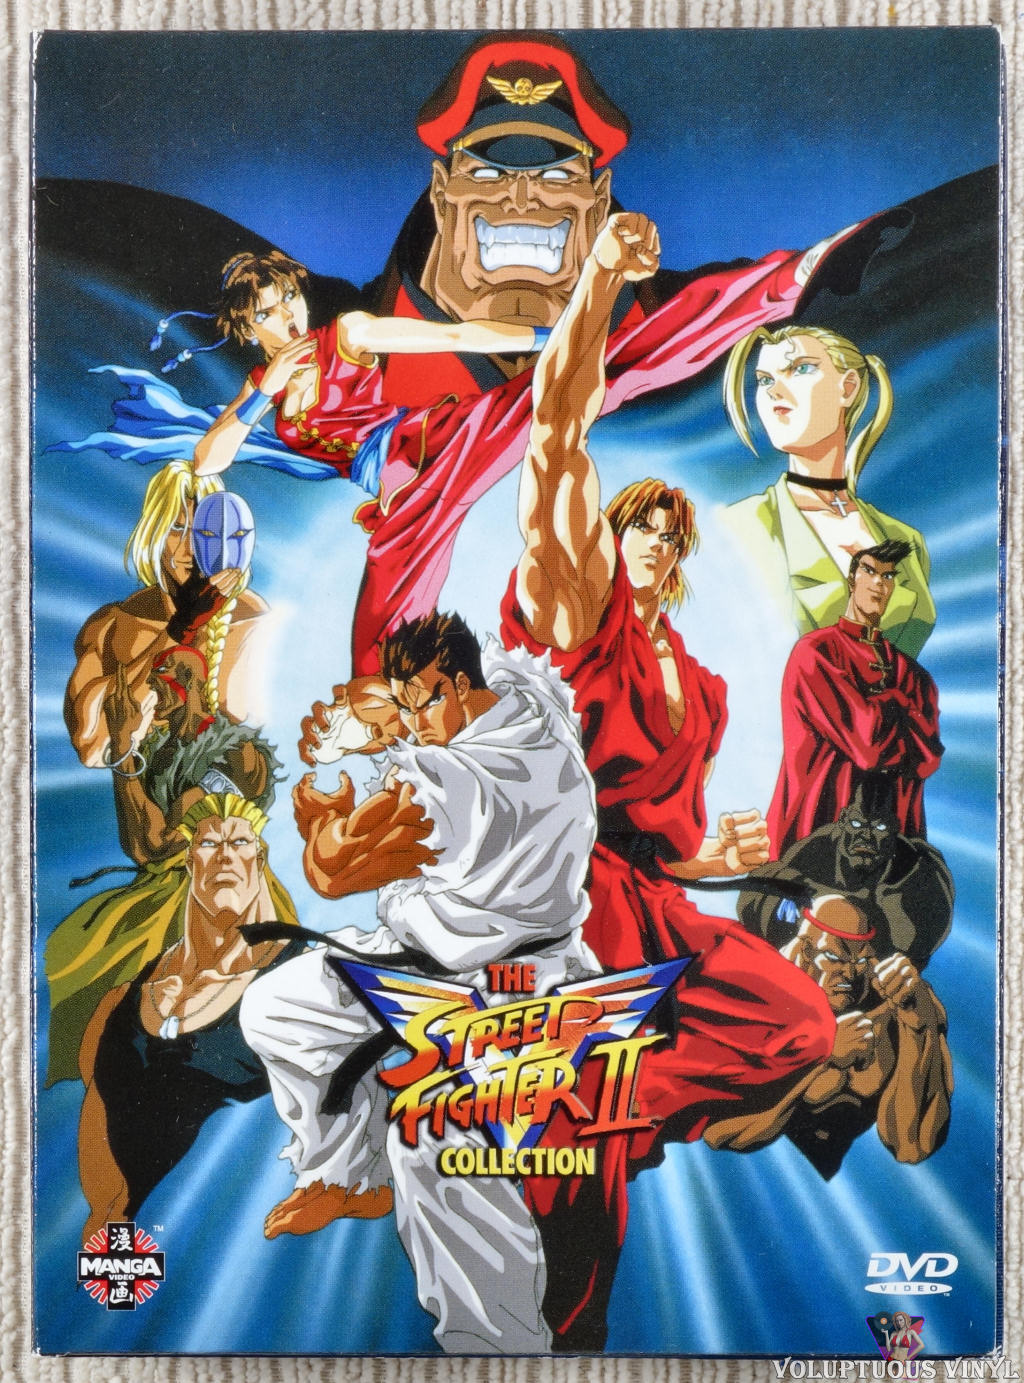 ANIMATION REVIEW: STREET FIGHTER II V—THE COLLECTION (2003) U.S. MANGA  ENTERTAINMENT SET (OUT-OF-PRINT)